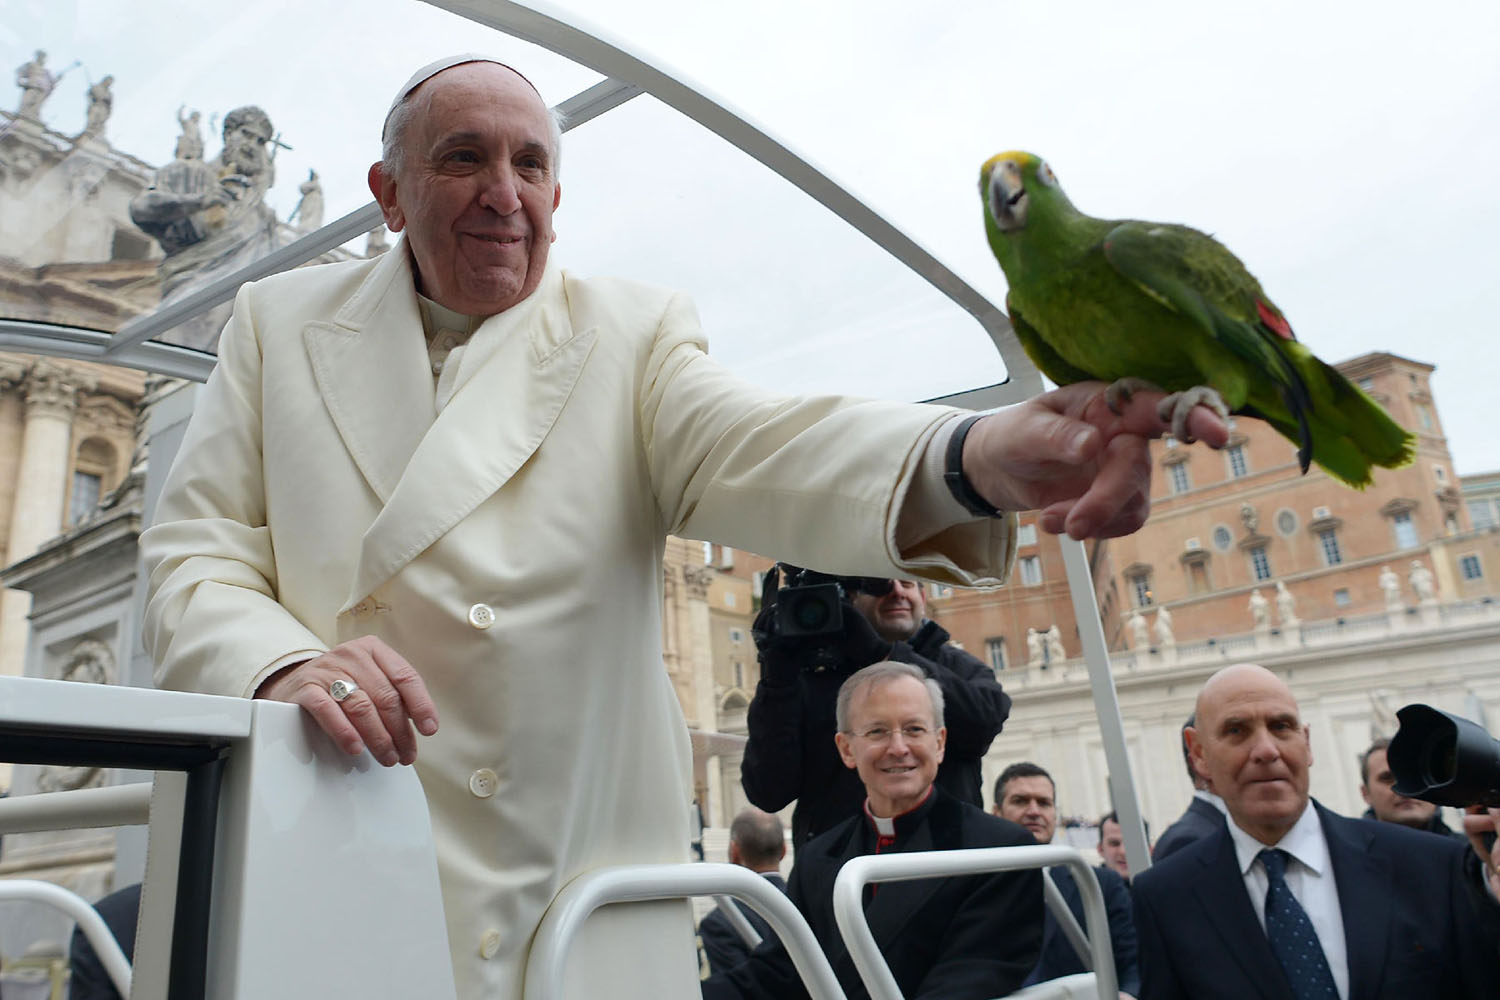 Pope Francis holds a parrot shown by a pilgrim as he arrives for his general audience at St Peter's square on January 29, 2014 at the Vatican. (Osservatore Romano—AFP—Getty Images)